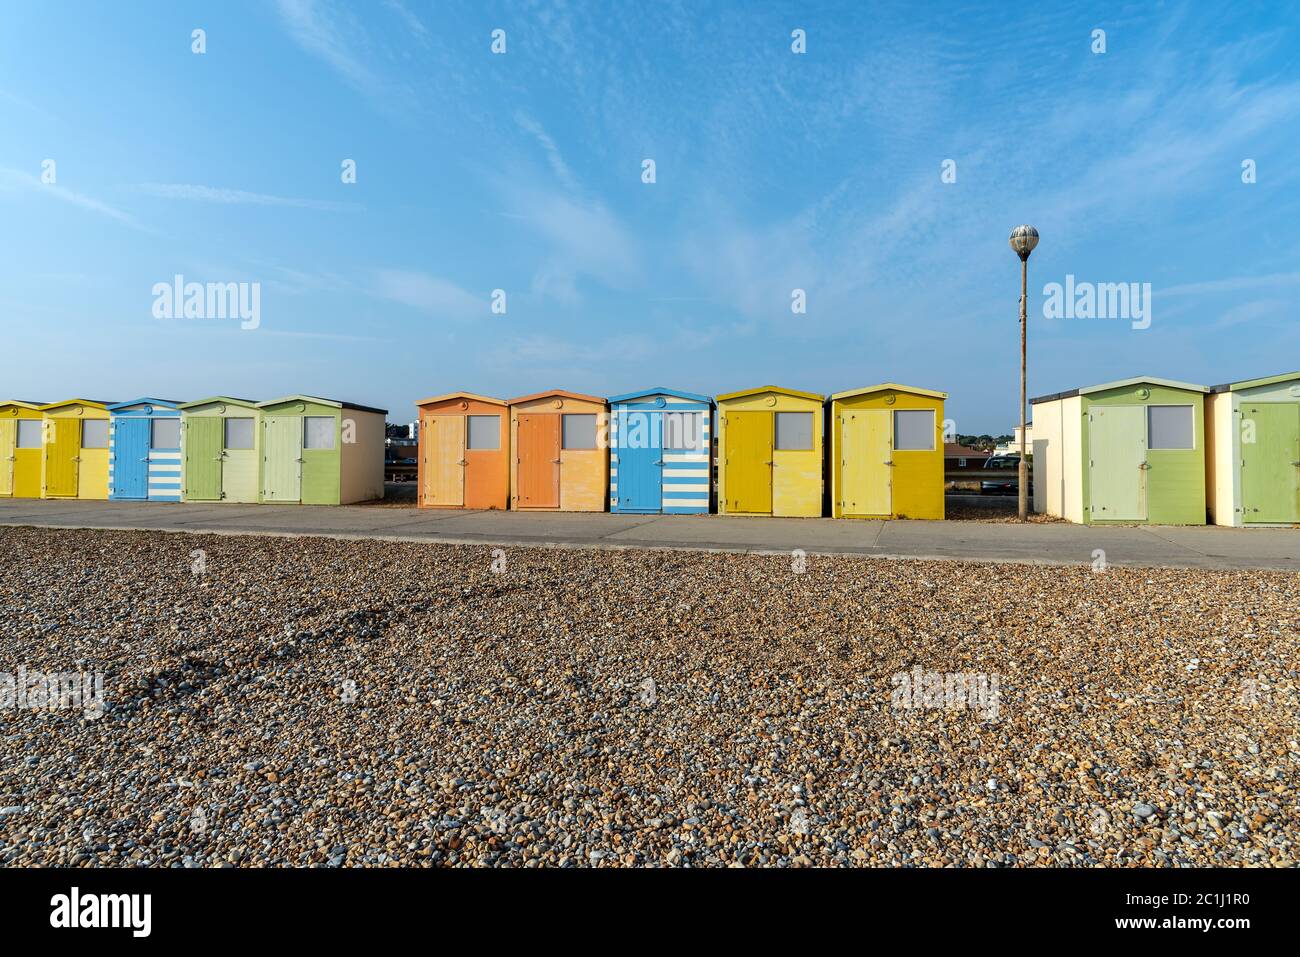 Colorful beach cabins seen in Seaford, England Stock Photo